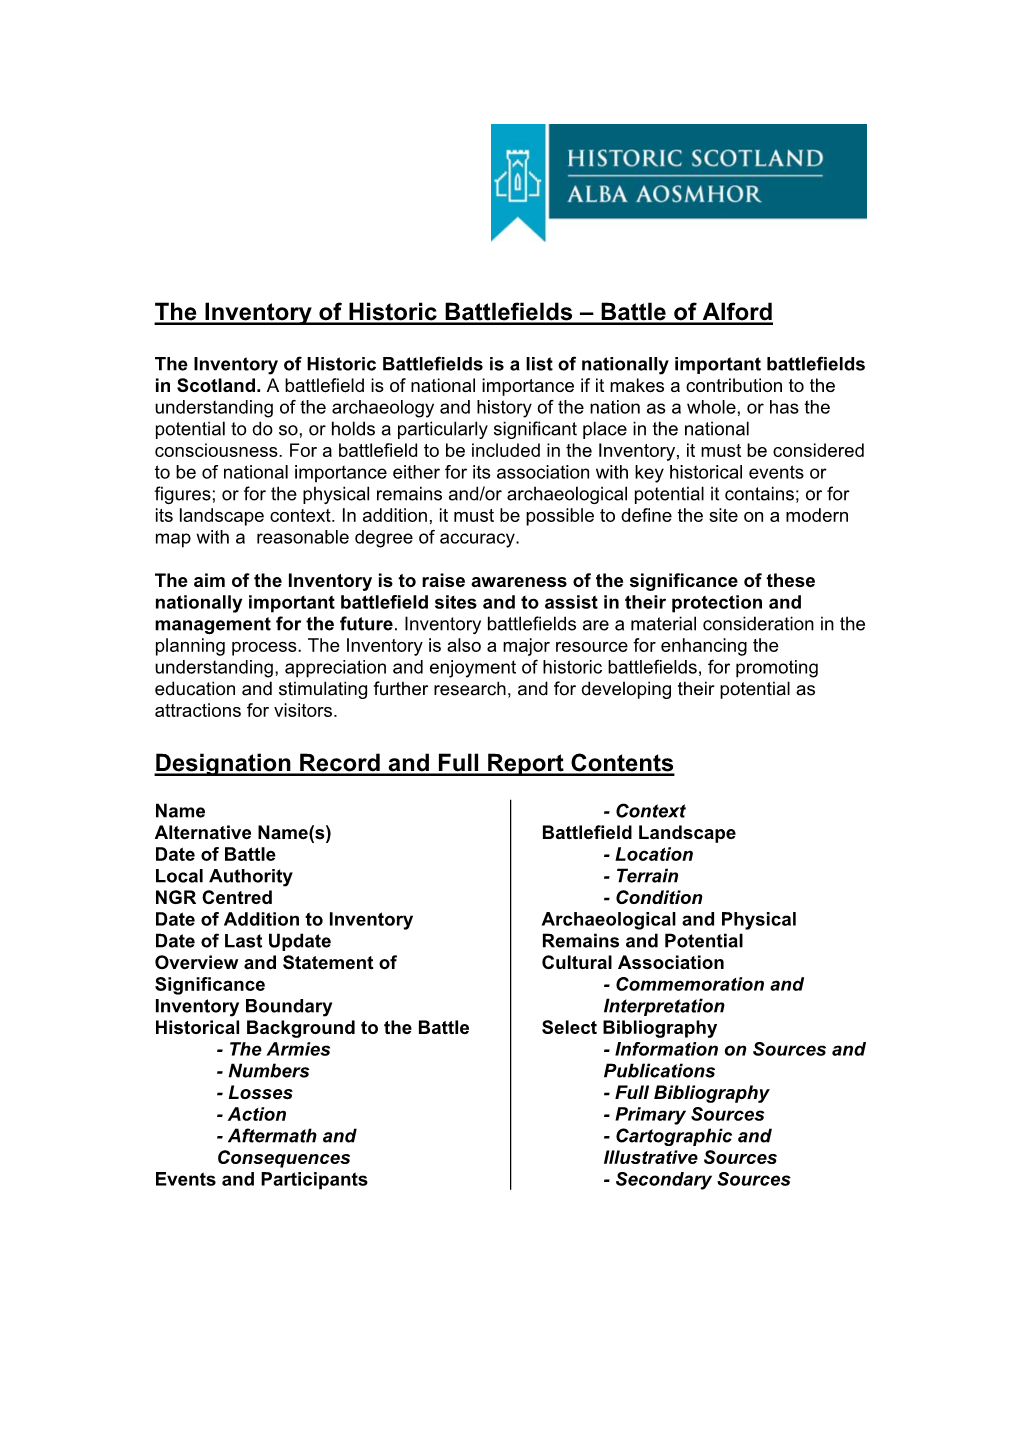 The Inventory of Historic Battlefields – Battle of Alford Designation Record